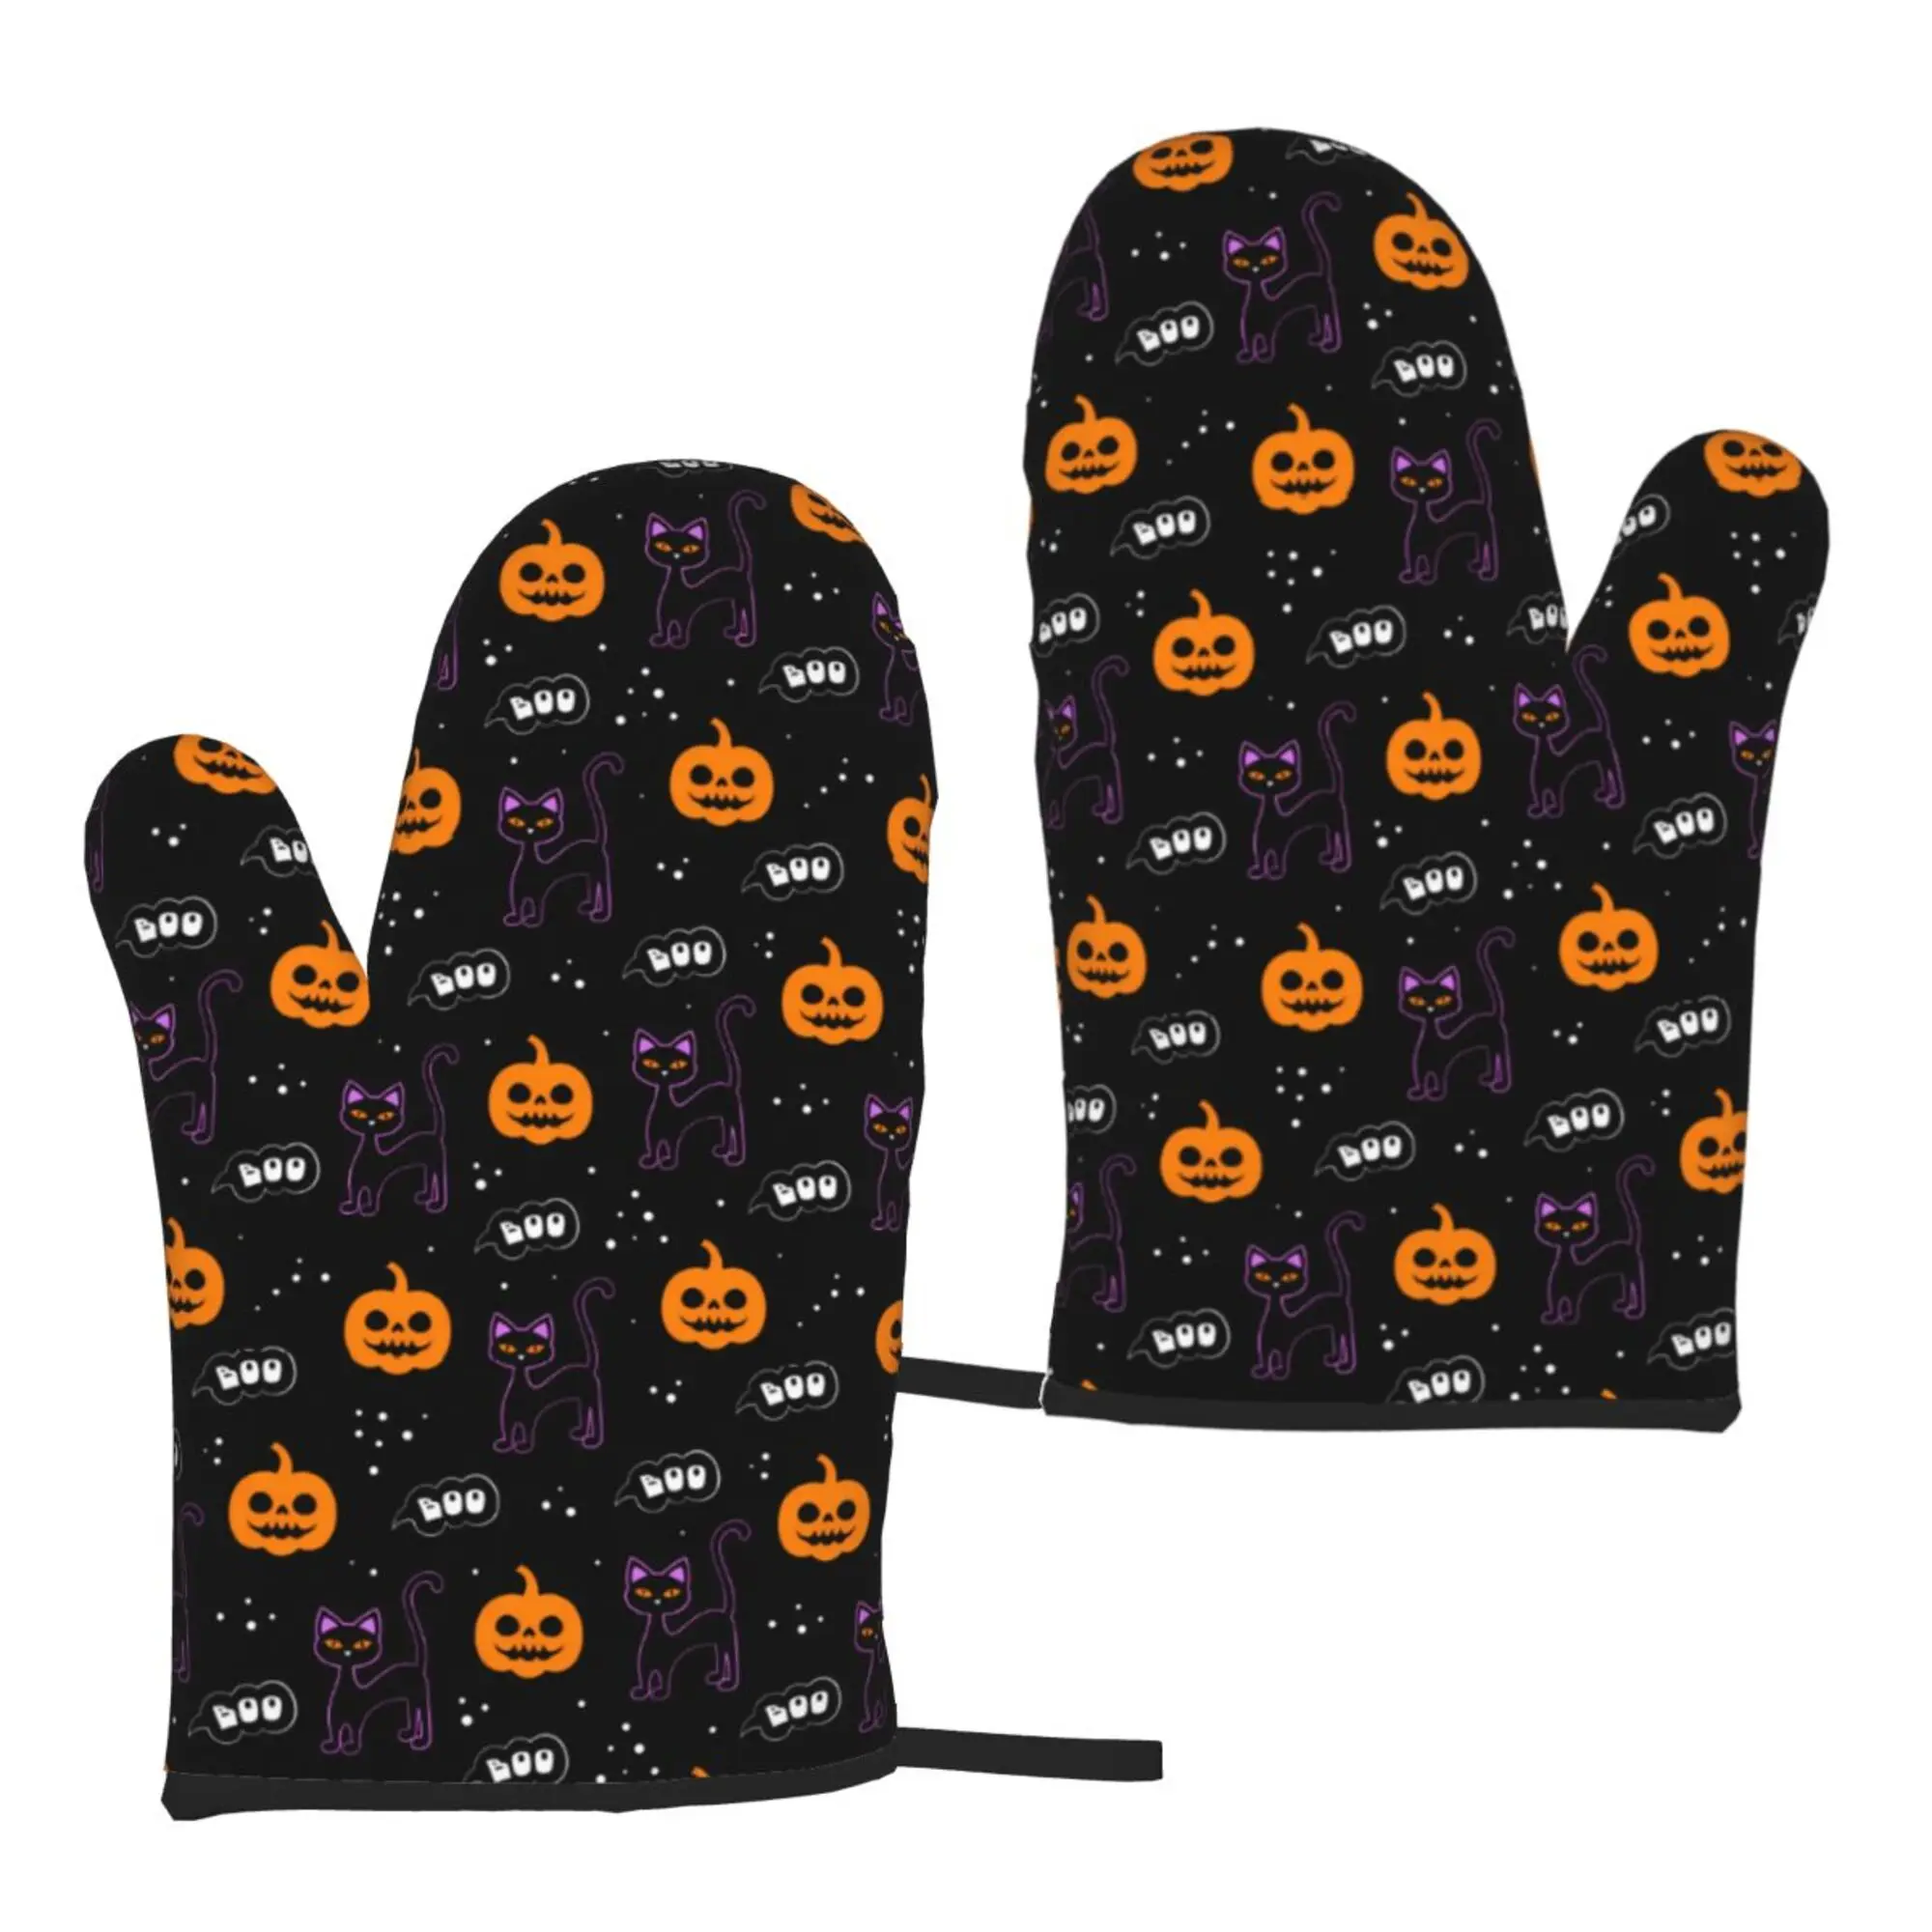 Black Cat Boo Pumpkin Halloween Oven Mitts 2pc Microwave Gloves Bbq Cooking Gloves Heat Resistant Kitchen Gloves One Size